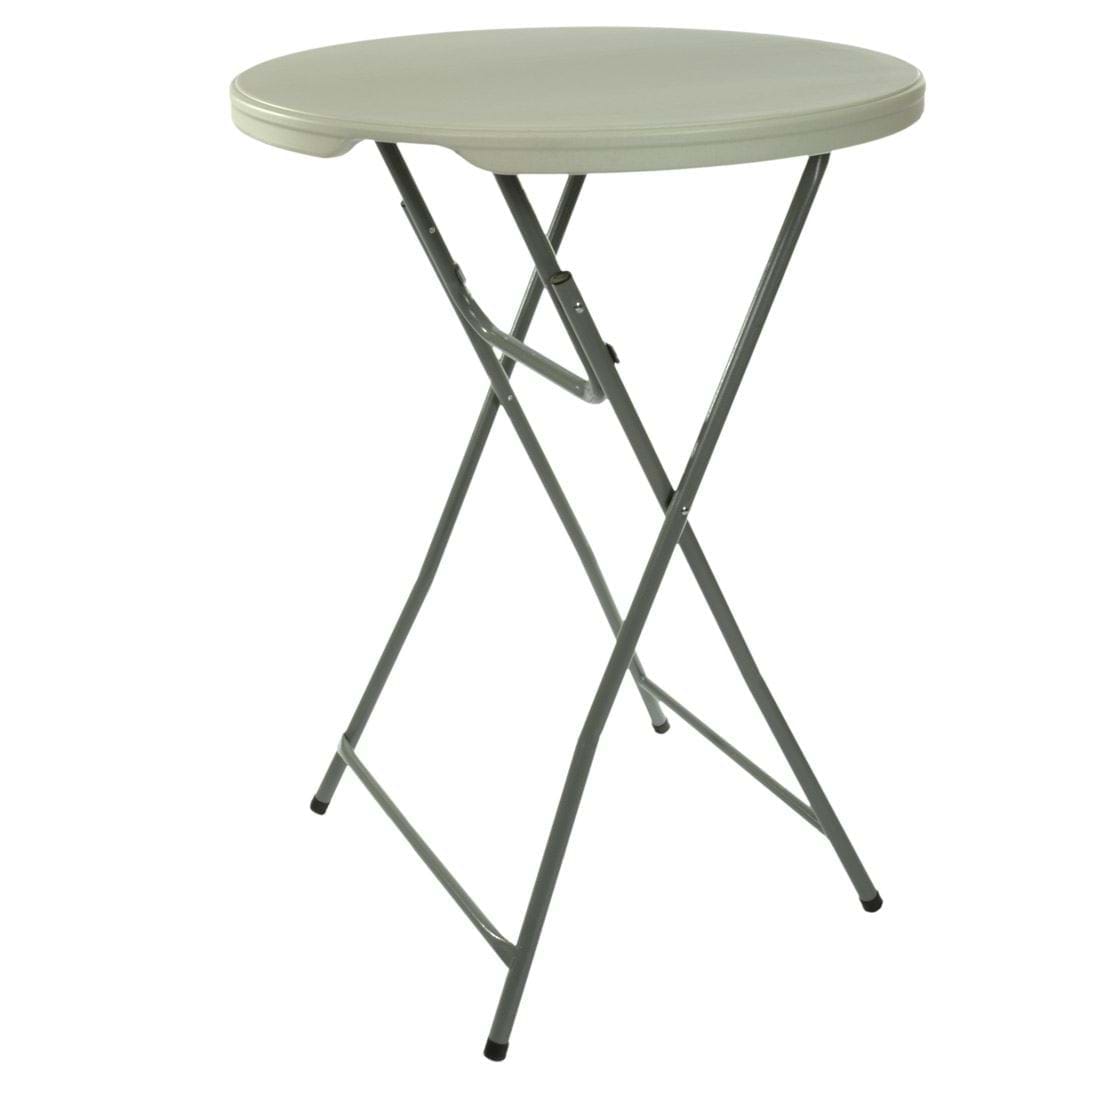 Tall plastic folding cocktail table 32 inch